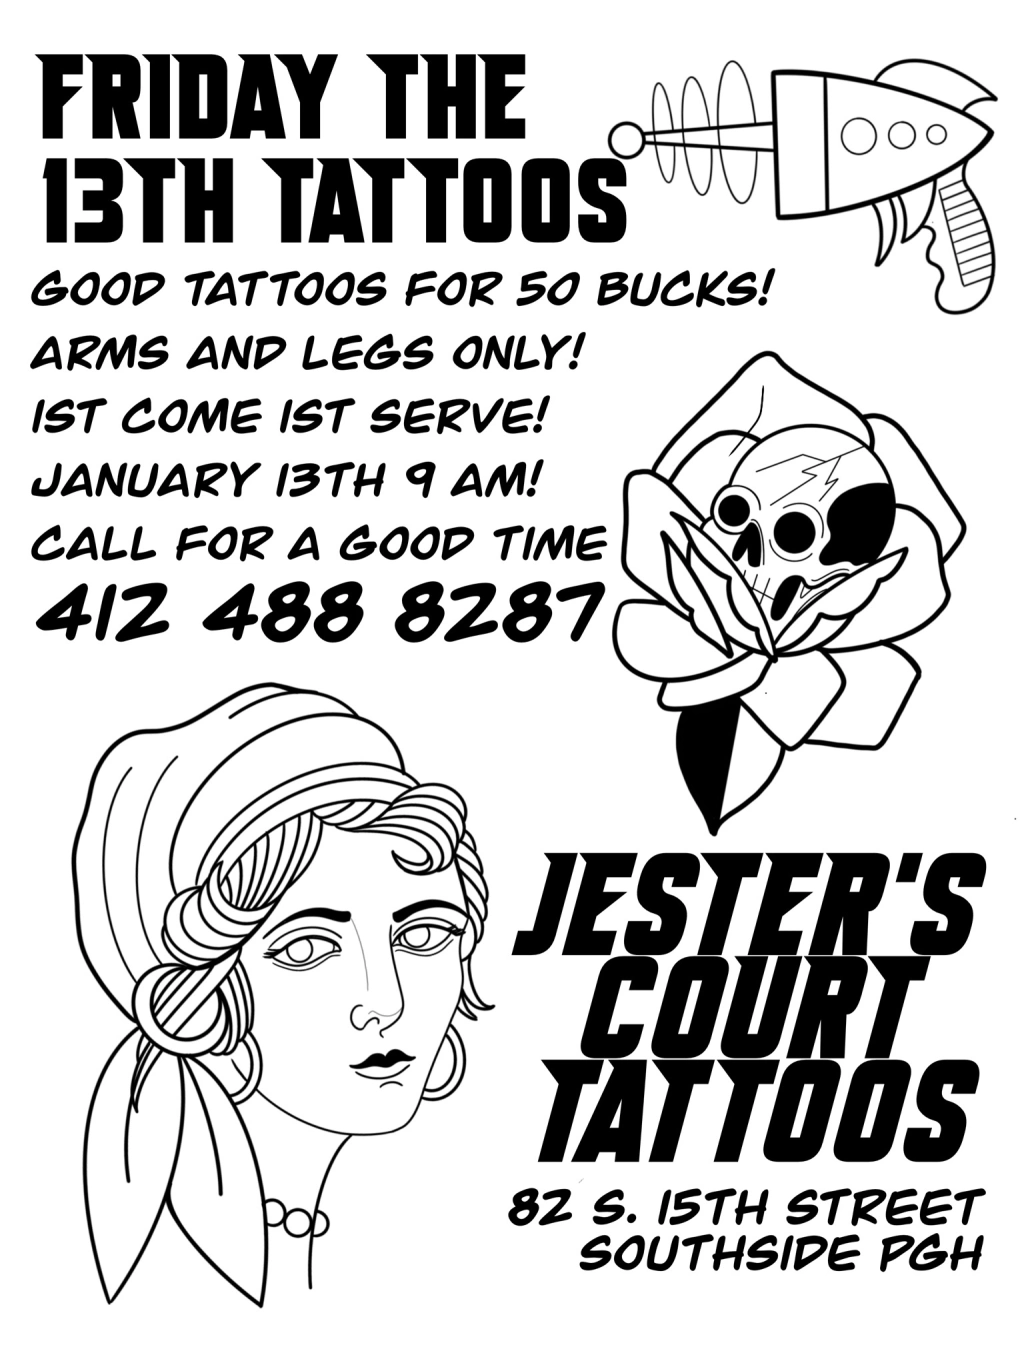 FRIDAY THE 13TH TATTOO FLASH DAY